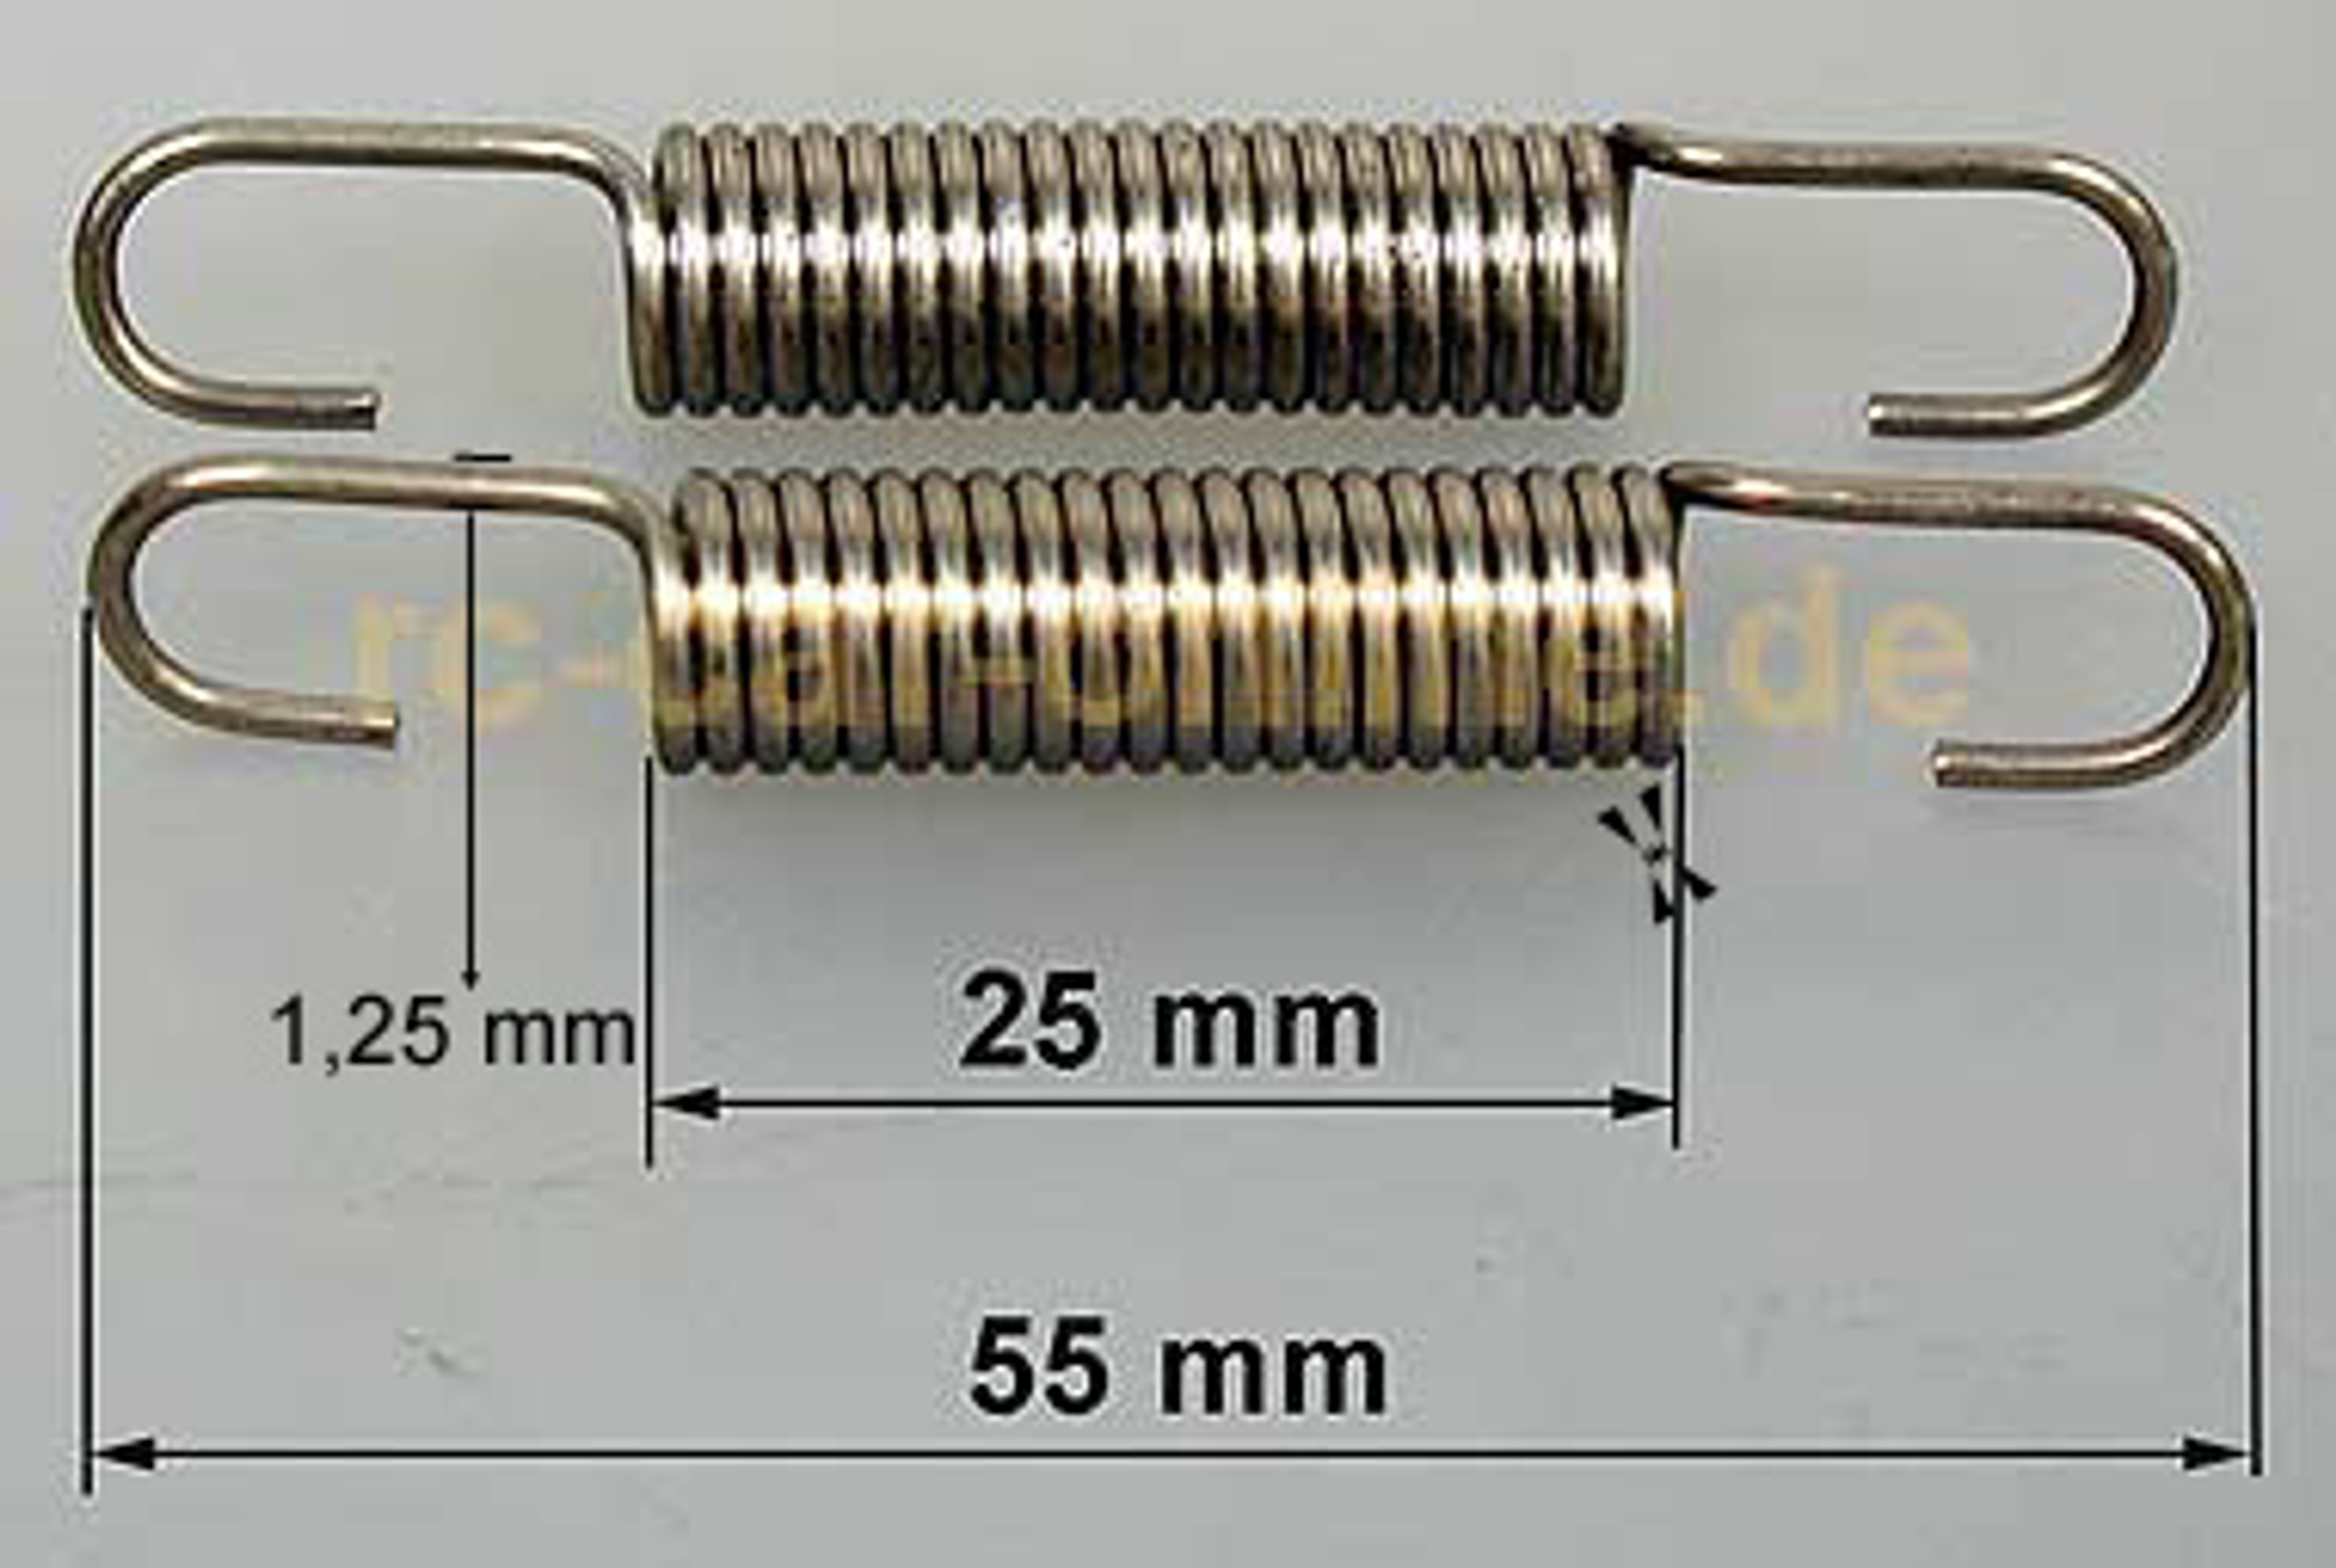 y0376 Replacement spring for Samba manifolds - 2 pcs.